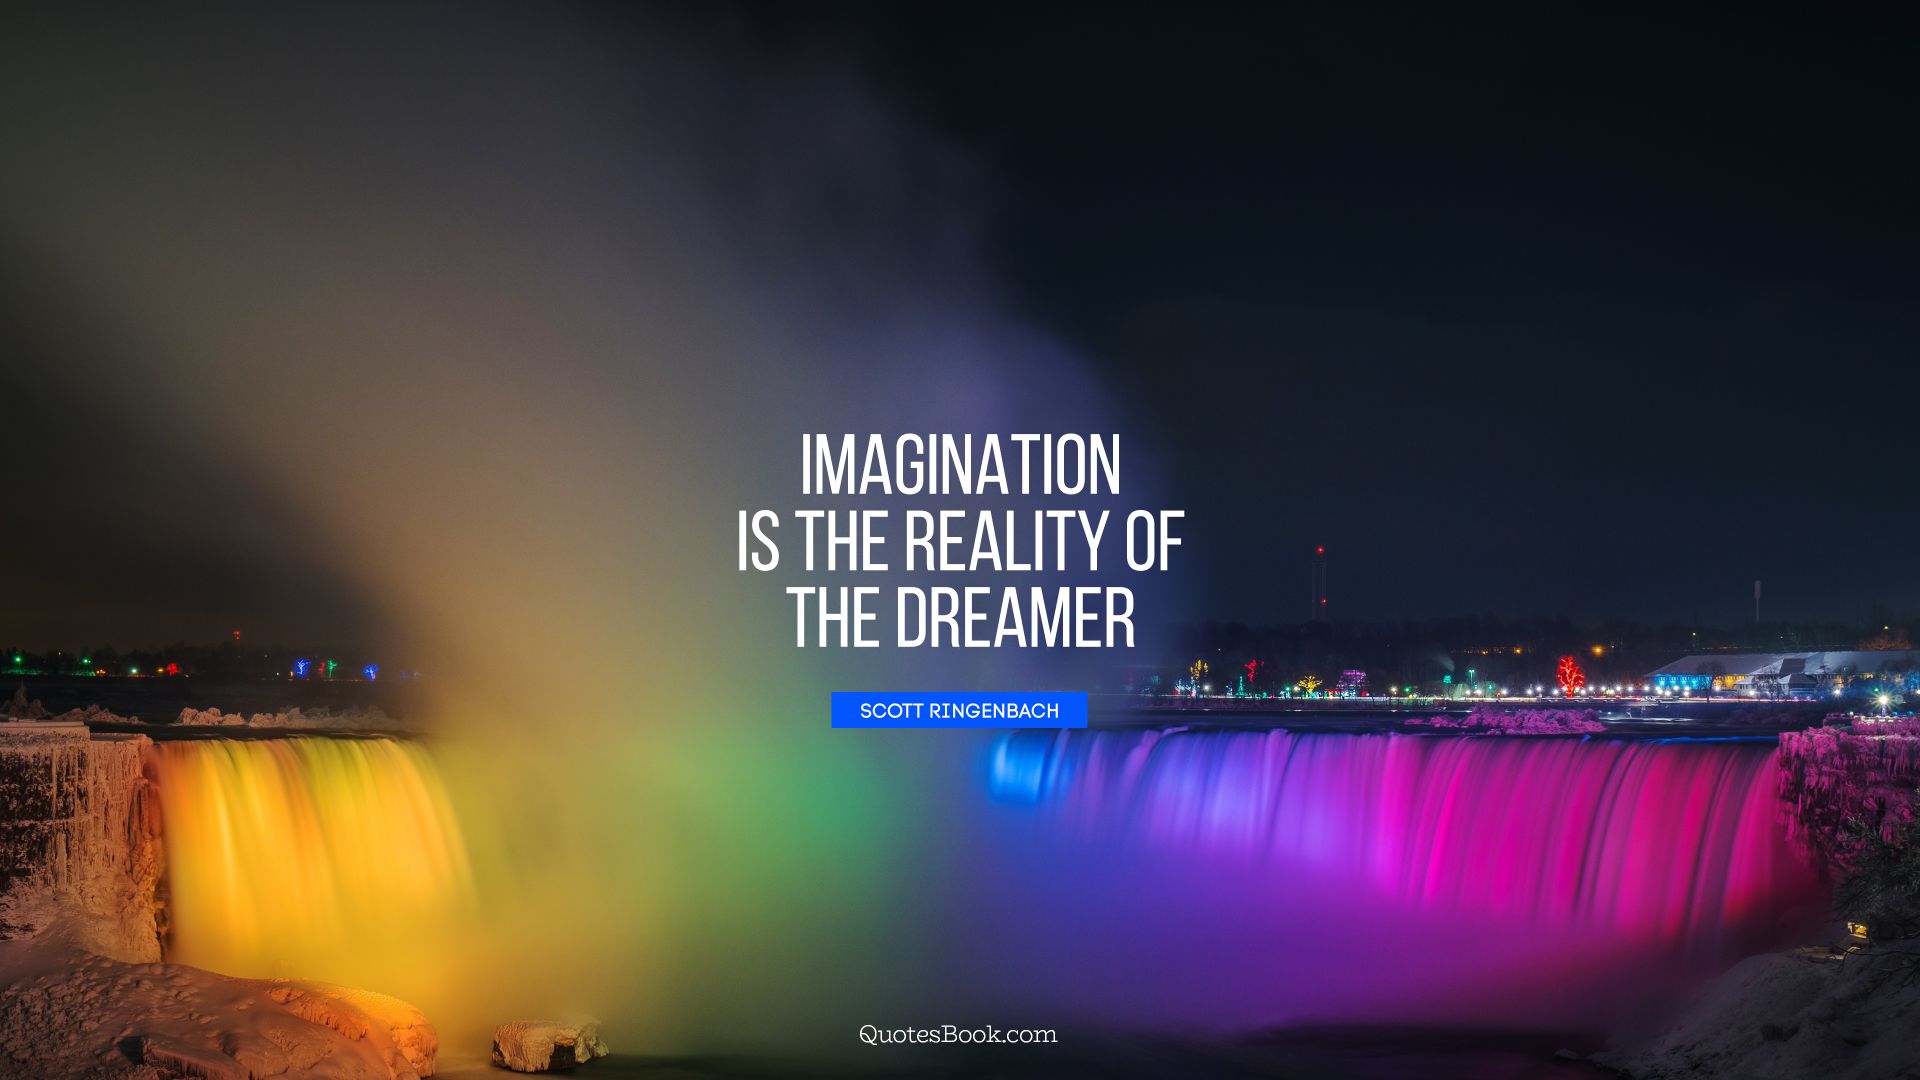 Imagination is the reality of the dreamer. - Quote by Scott Ringenbach